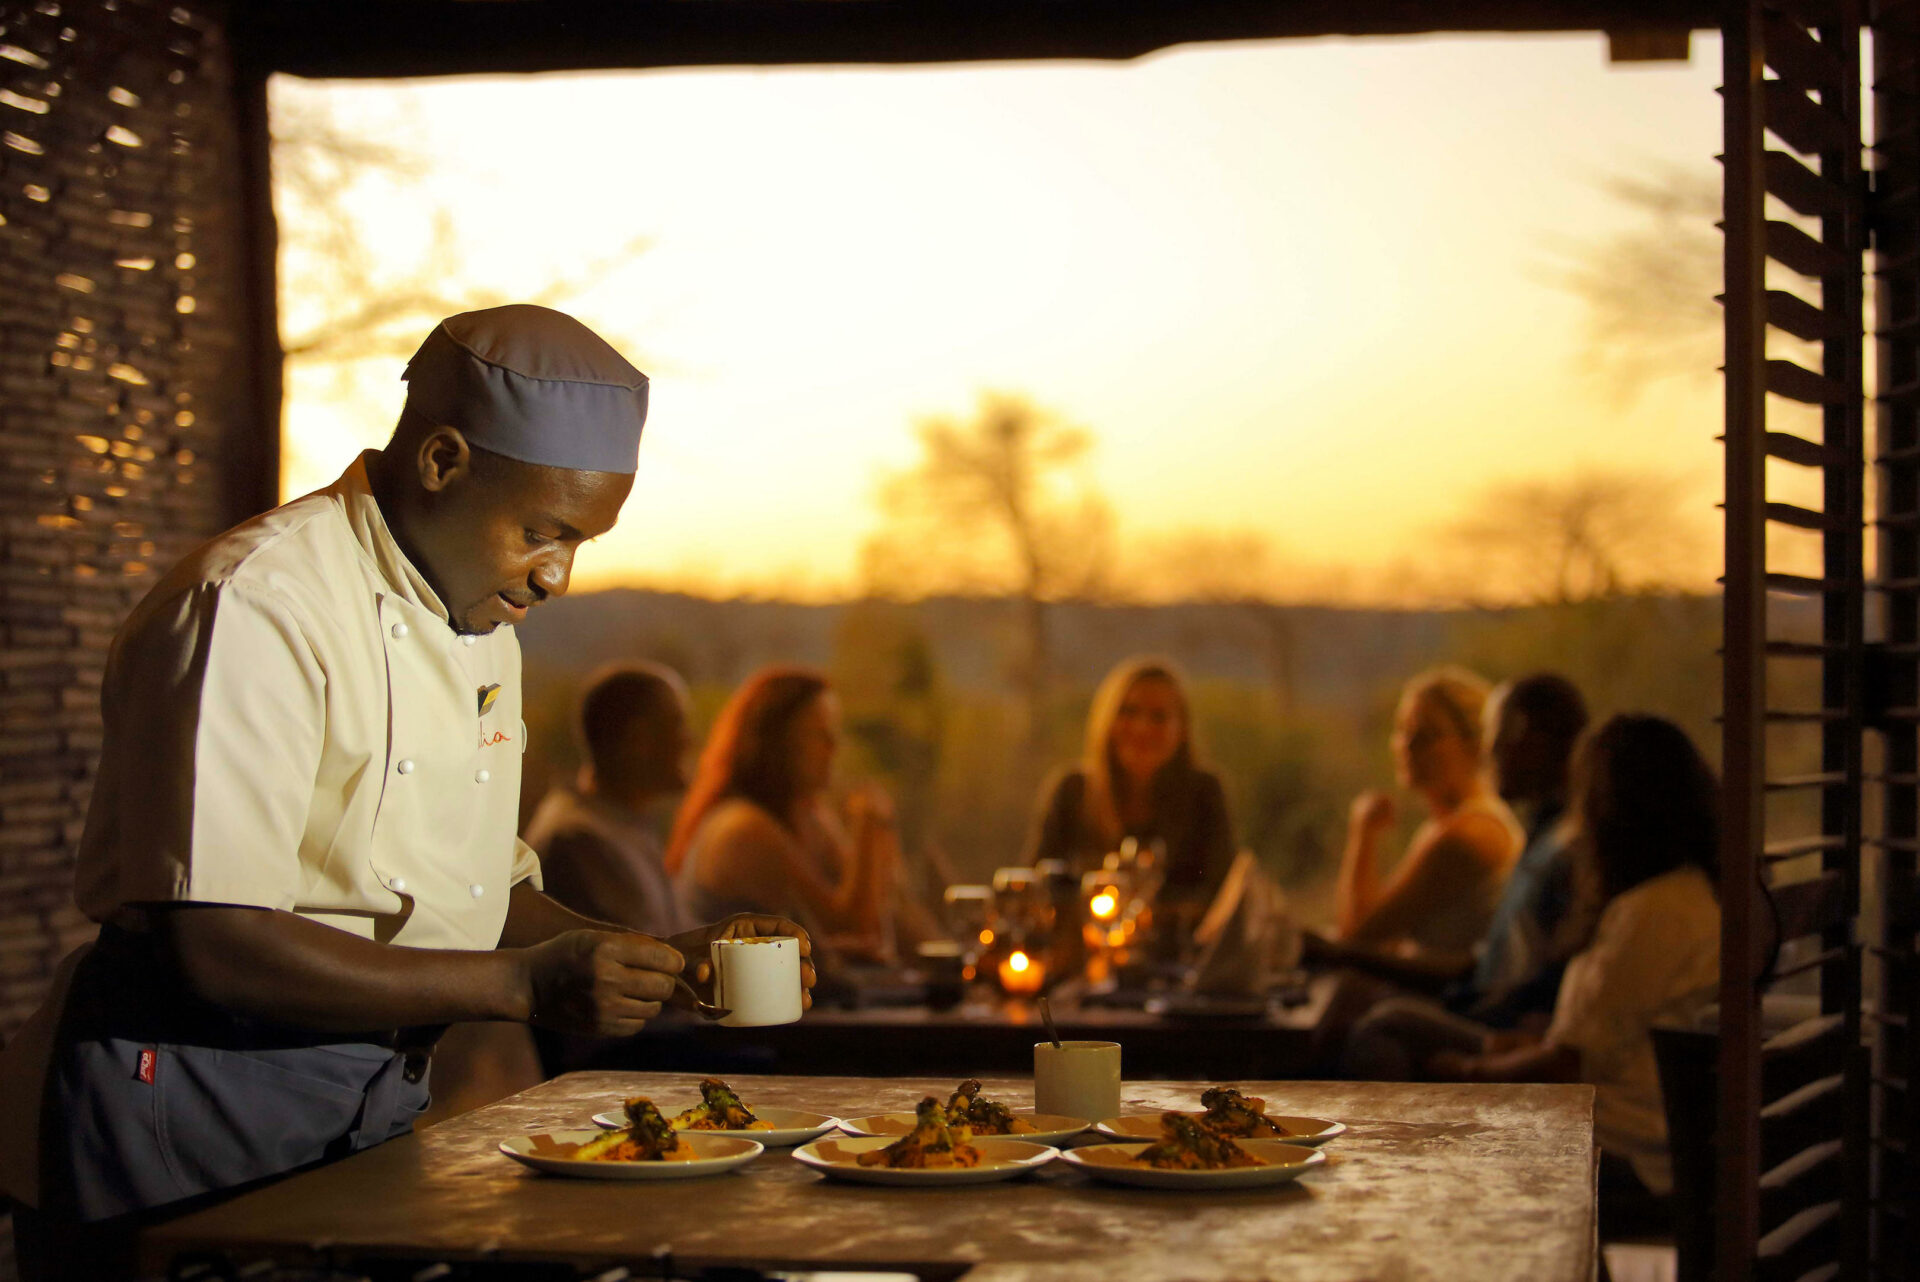 Jabali Private House with a private chef and a guests in the background, with Grand Africa Safaris